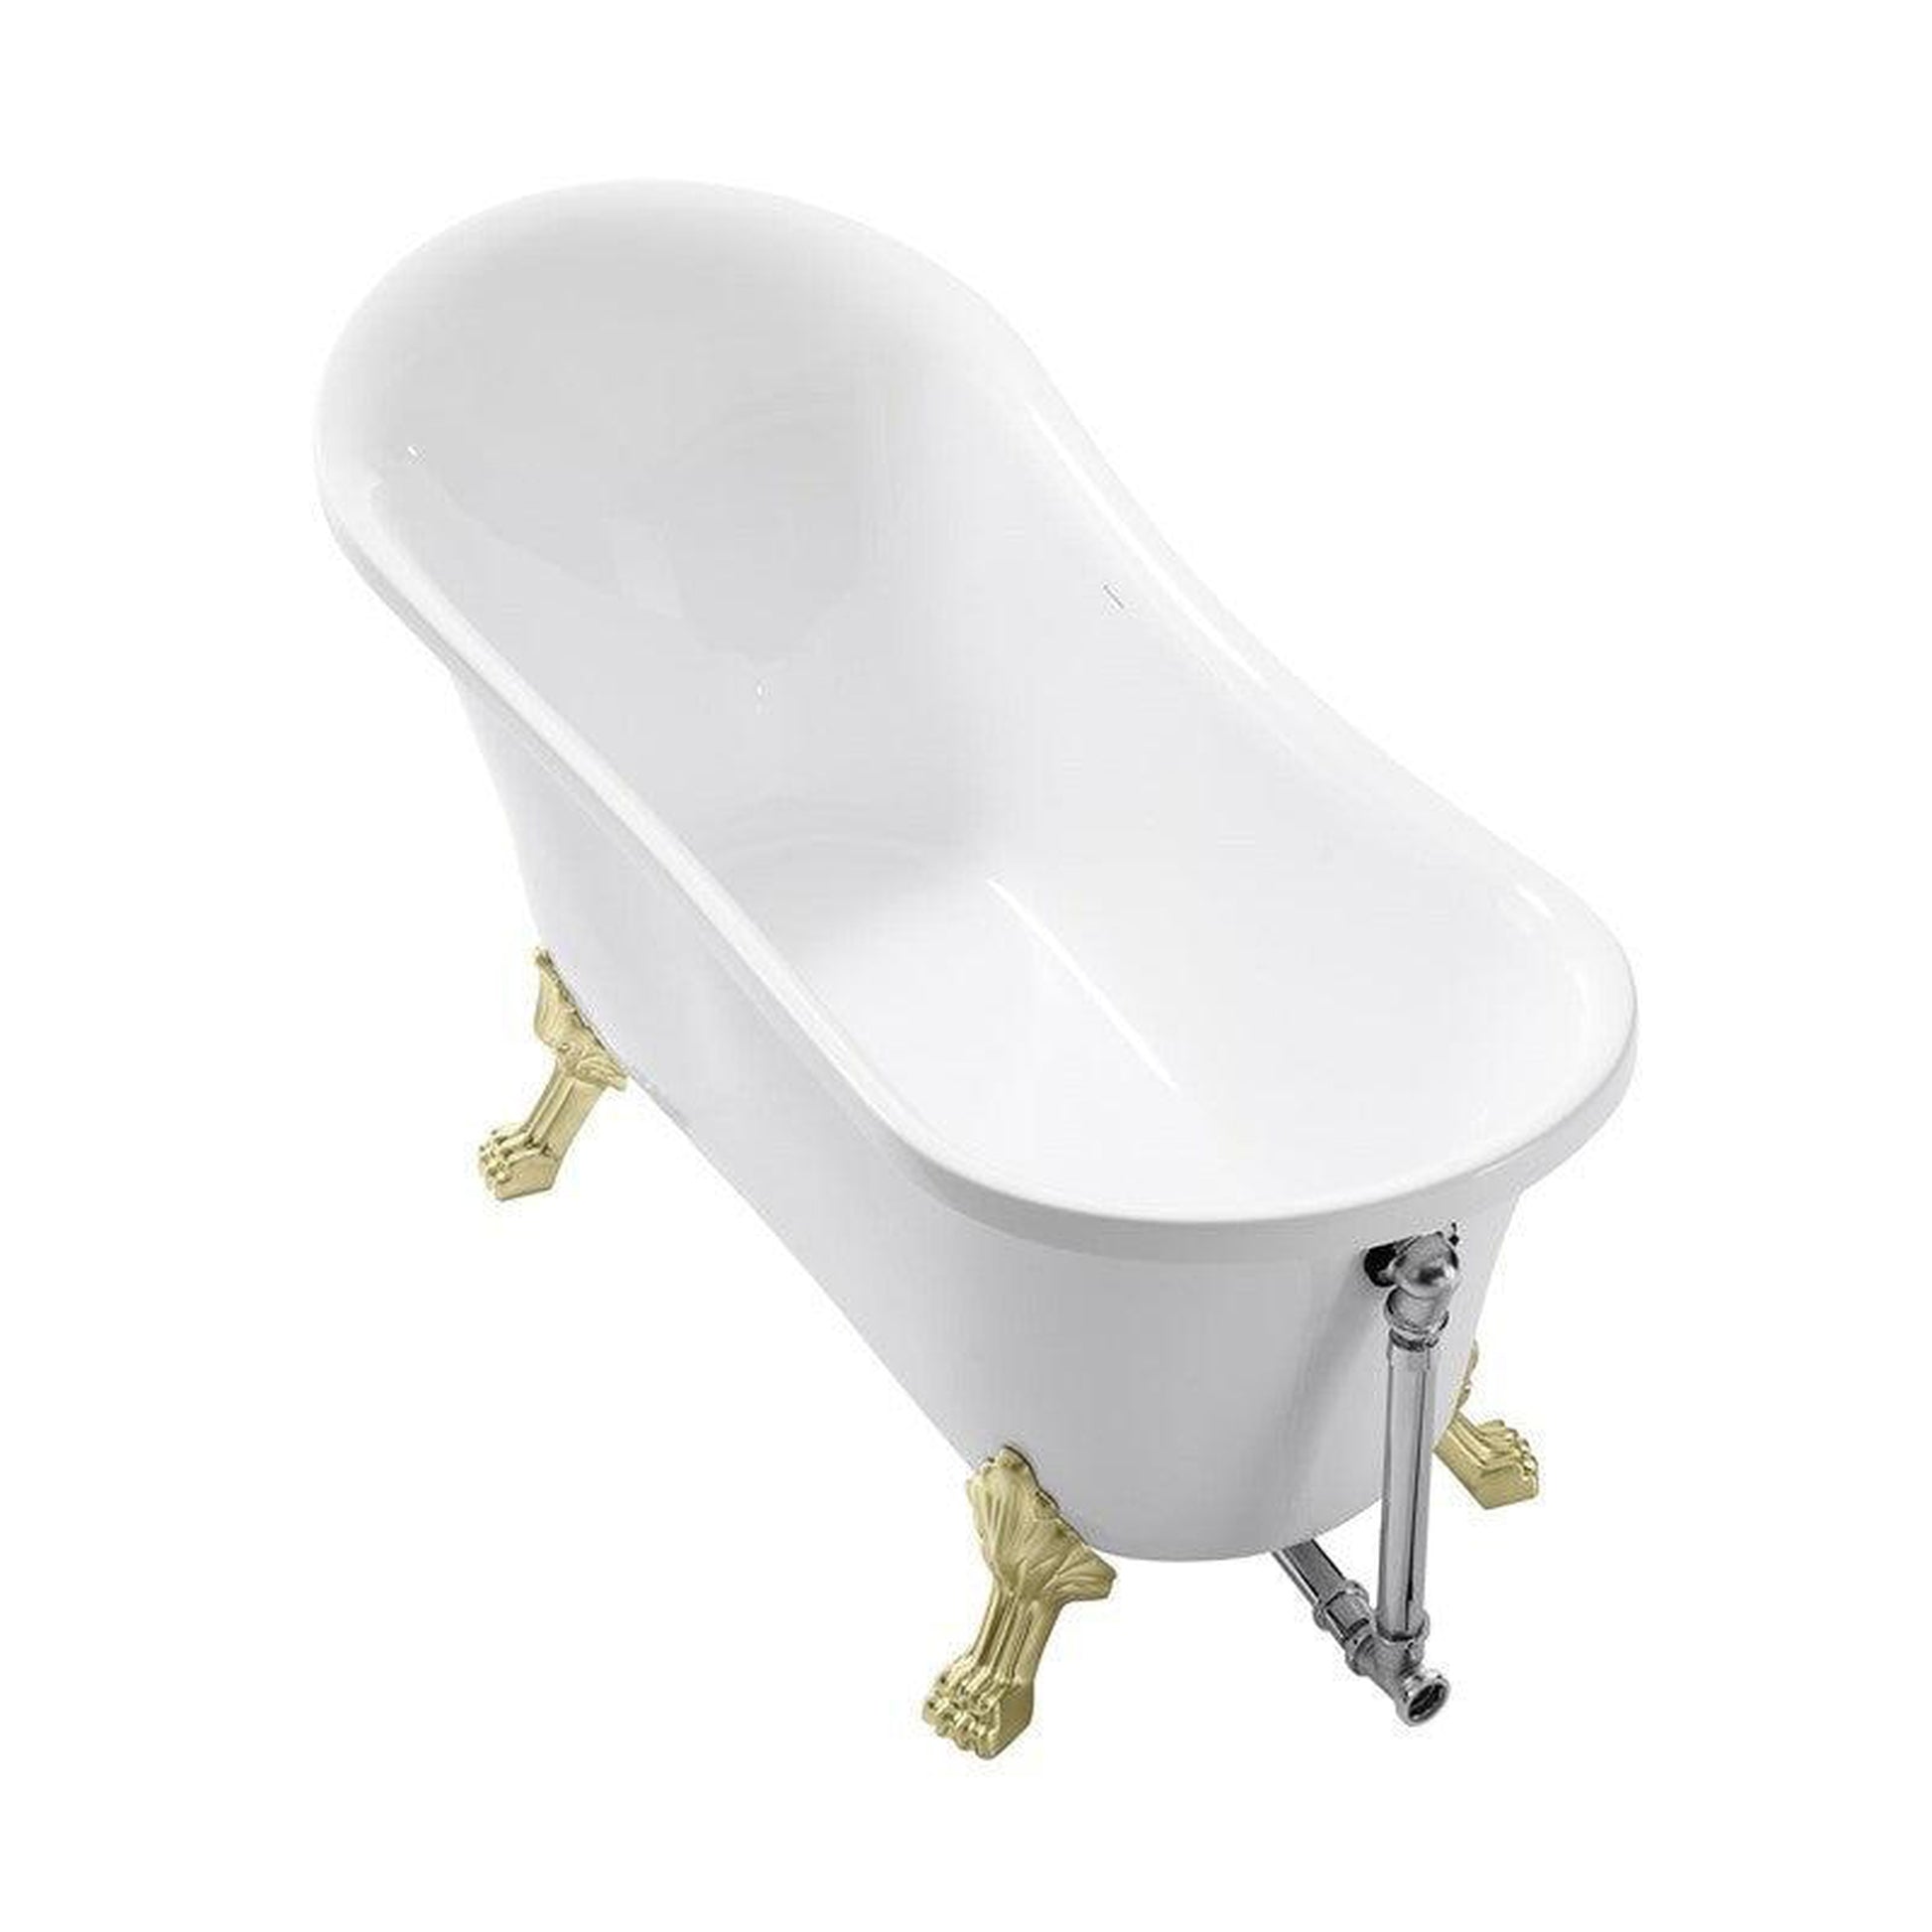 Swiss Madison Caché 63" x 29" White Right-Hand Drain Freestanding Bathtub With Adjustable Brushed Gold Clawfoot Feet, Overflow Kit and Pop-Up Drain